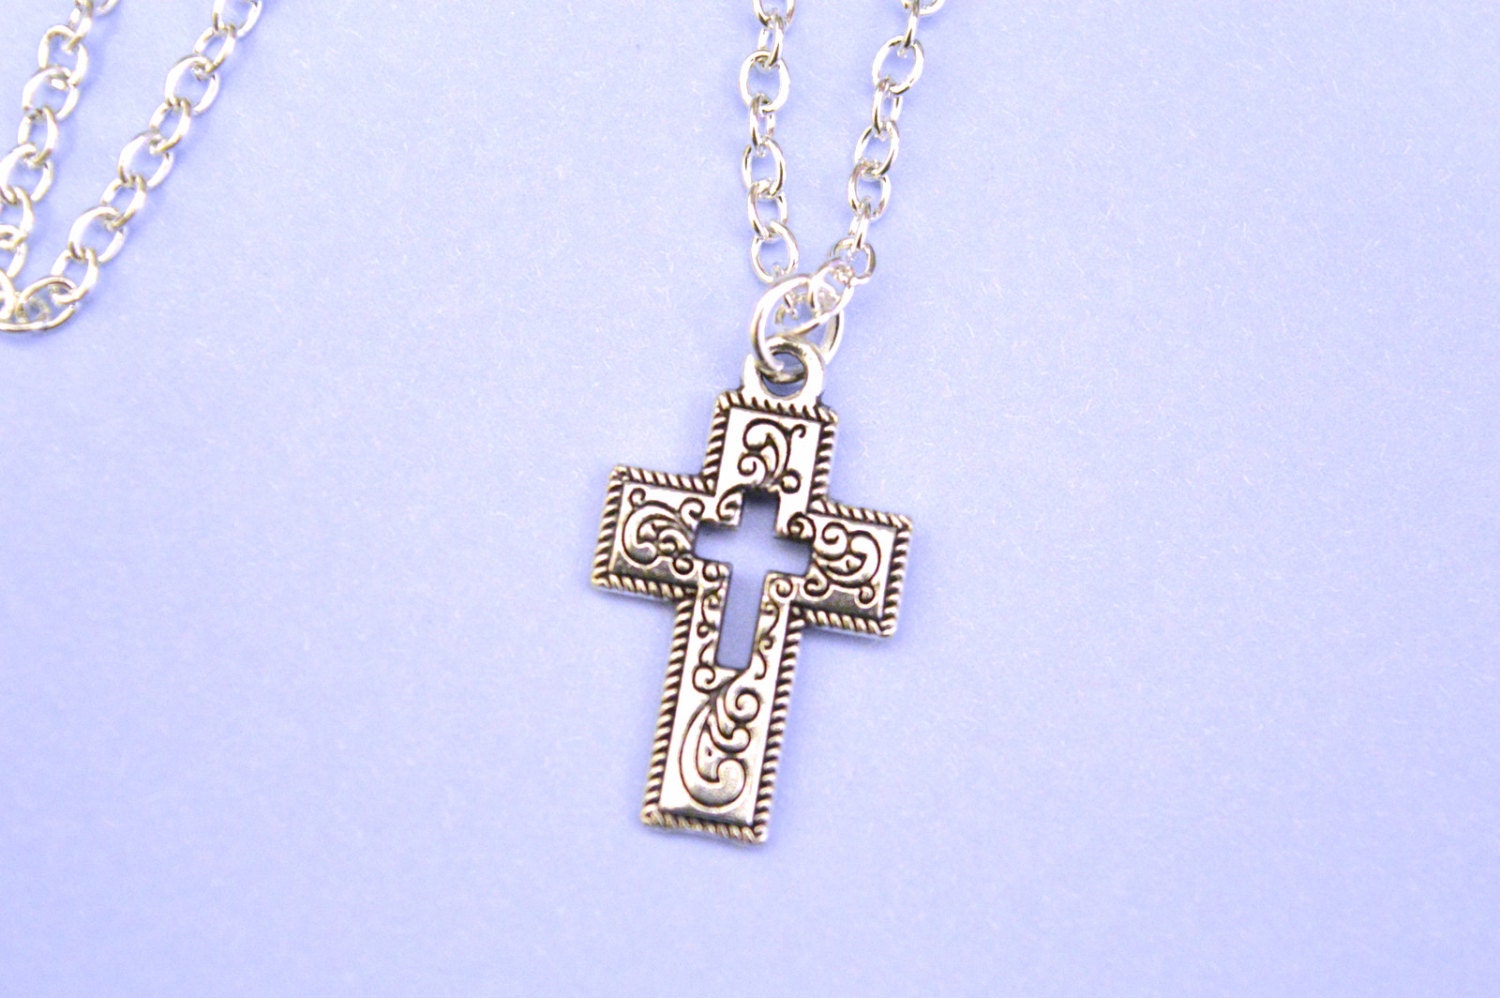 Sale Silver Cross Necklace, Christian Christianity Christening jewelry necklace gift, Friend, Silver Cross Necklace, Silver Cross Pendant